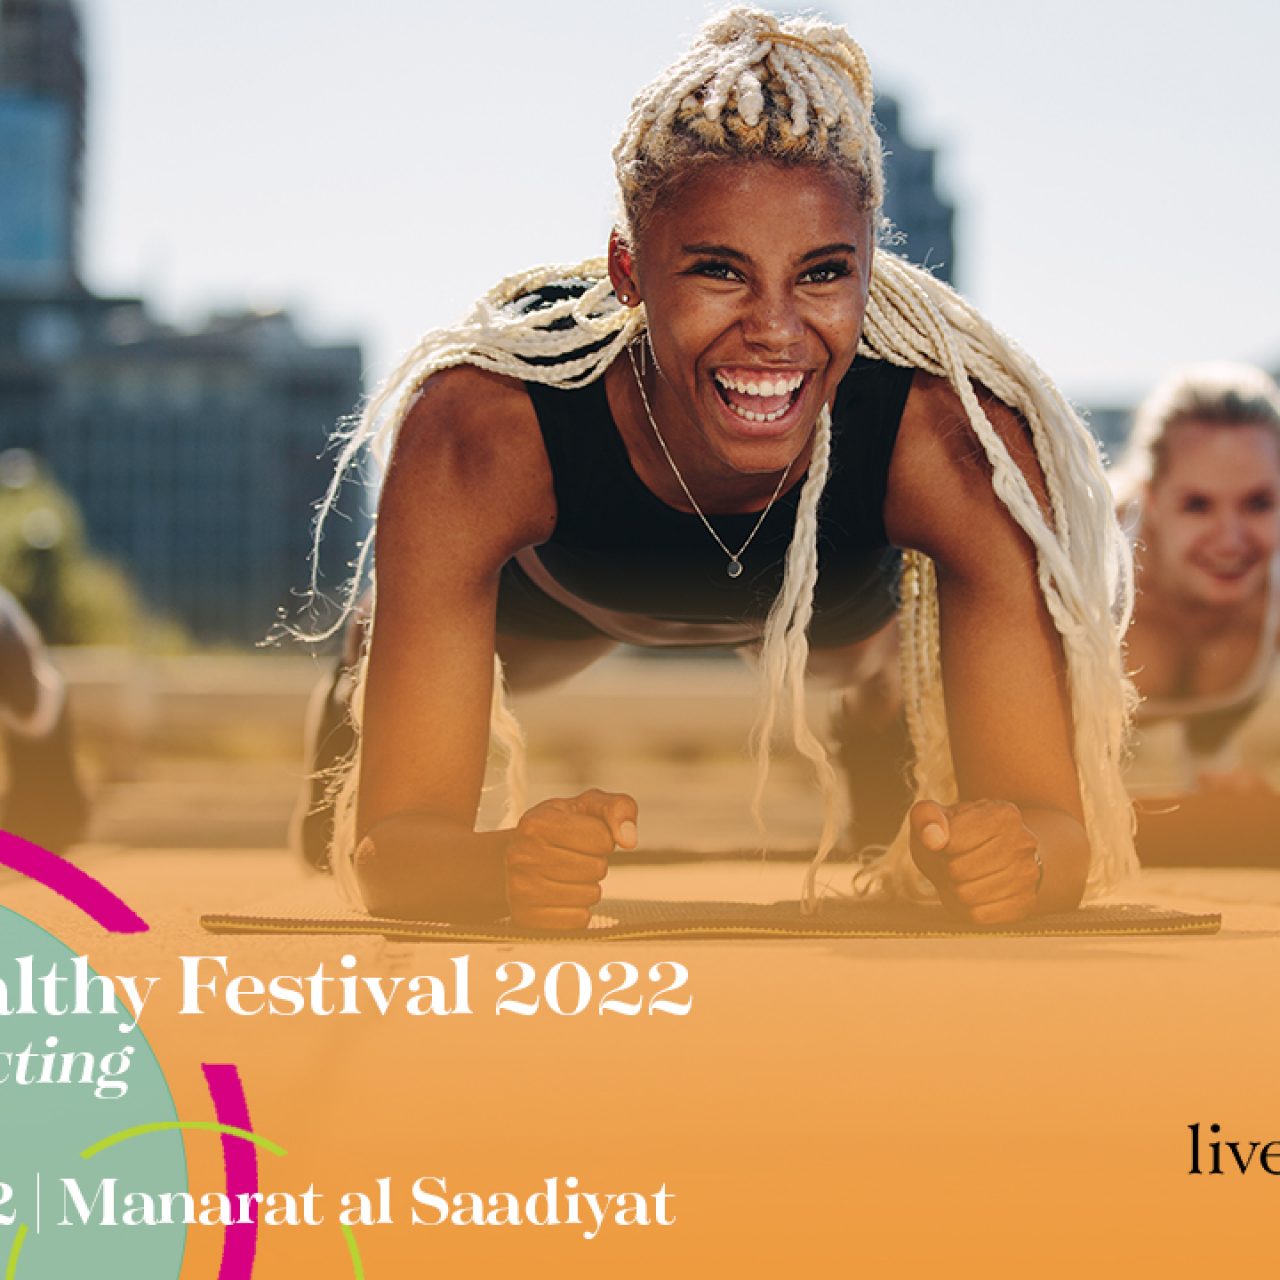 Reconnect at the Livehealthy Festival 2022